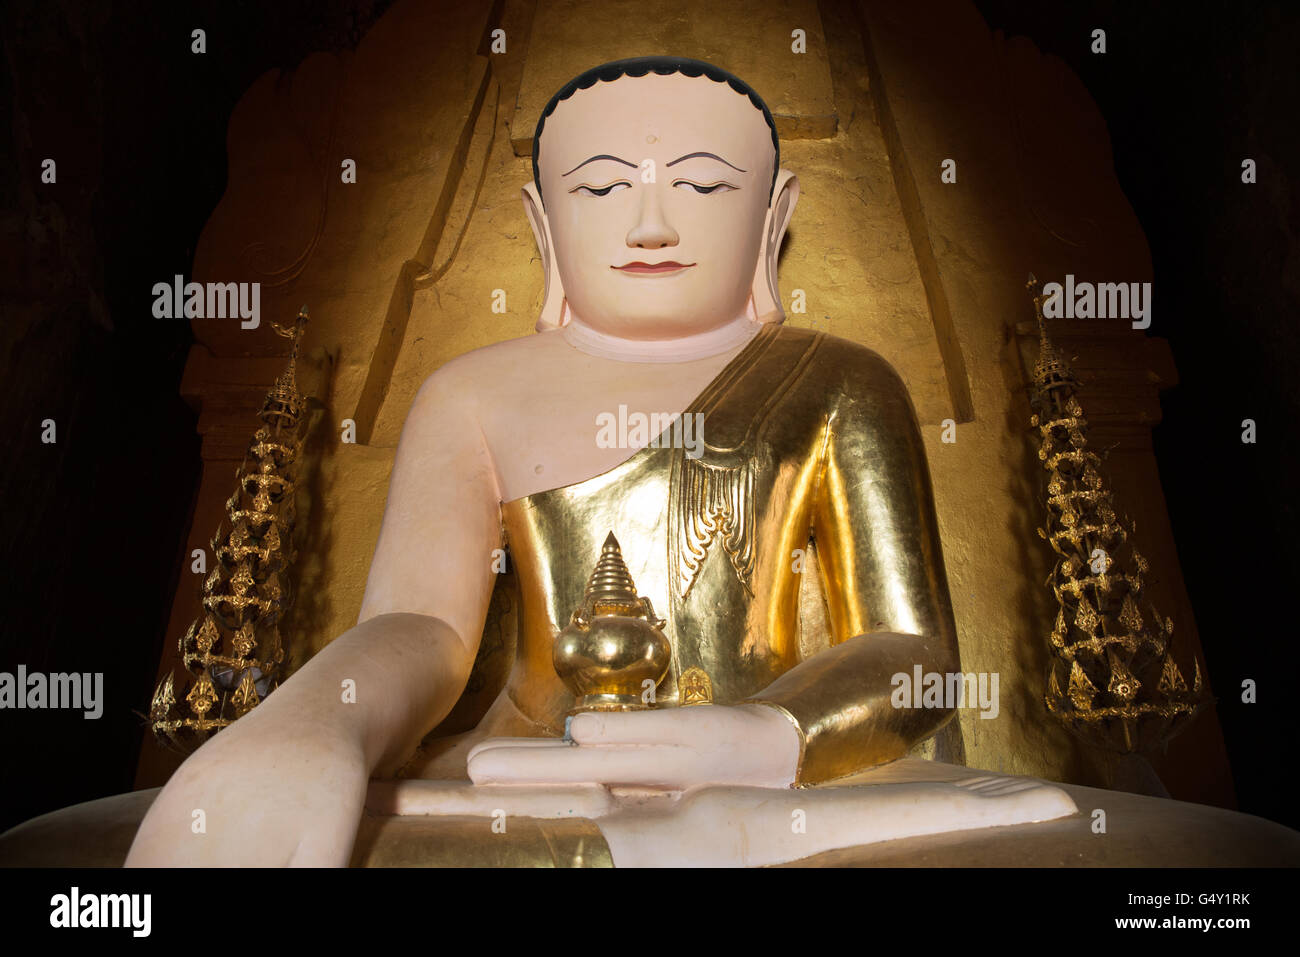 Sitting statue of a Buddha with amrita in his left hand, Iza Gawna Pagoda, Old Bagan Archaeological Zone, Myanmar Stock Photo